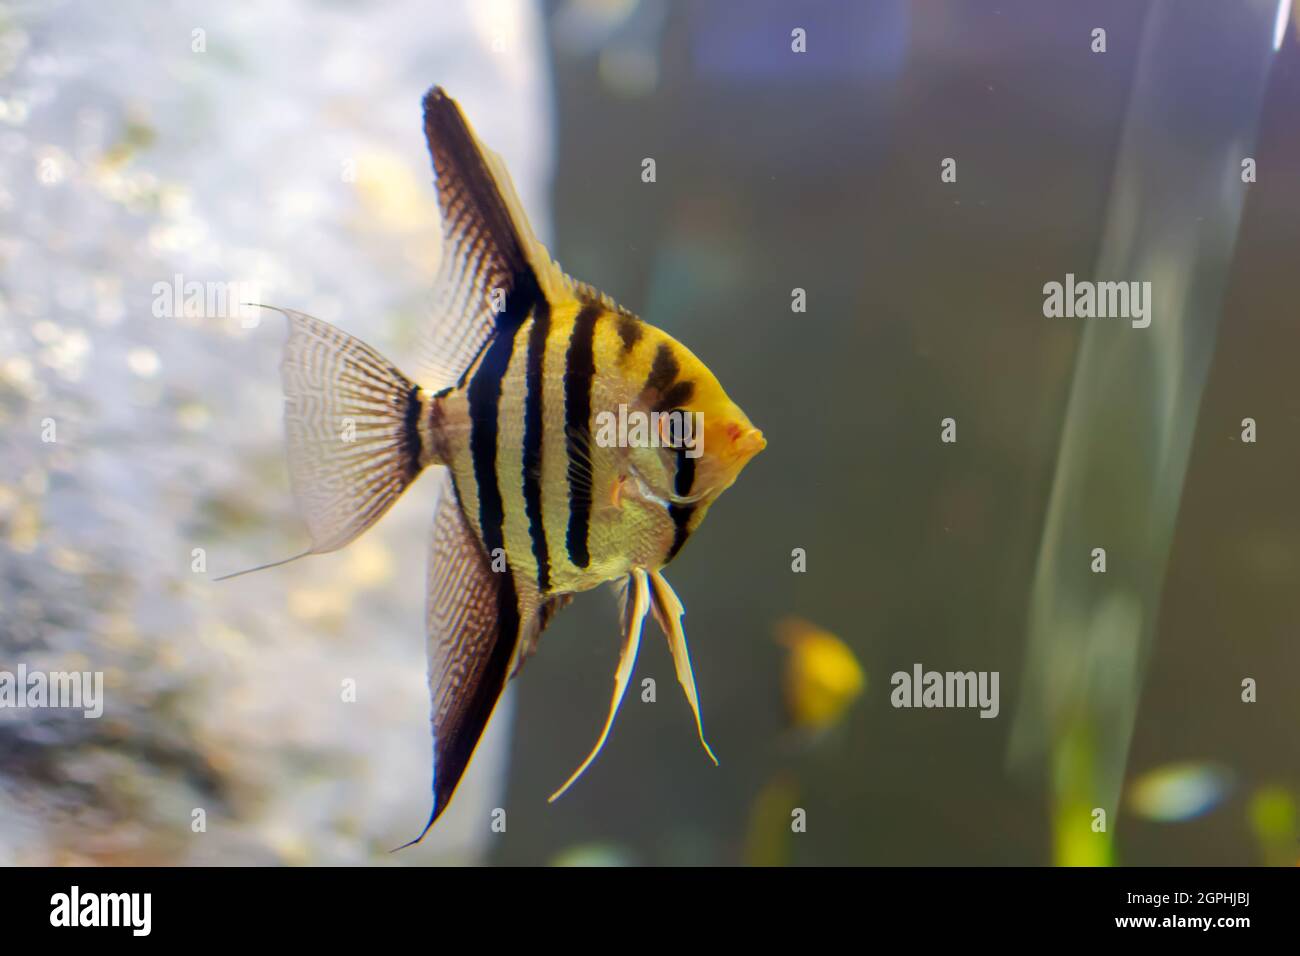 Pterophyllum altum, also referred to as the altum angelfish, deep angelfish, or Orinoco angelfish, in fish tank. Stock Photo